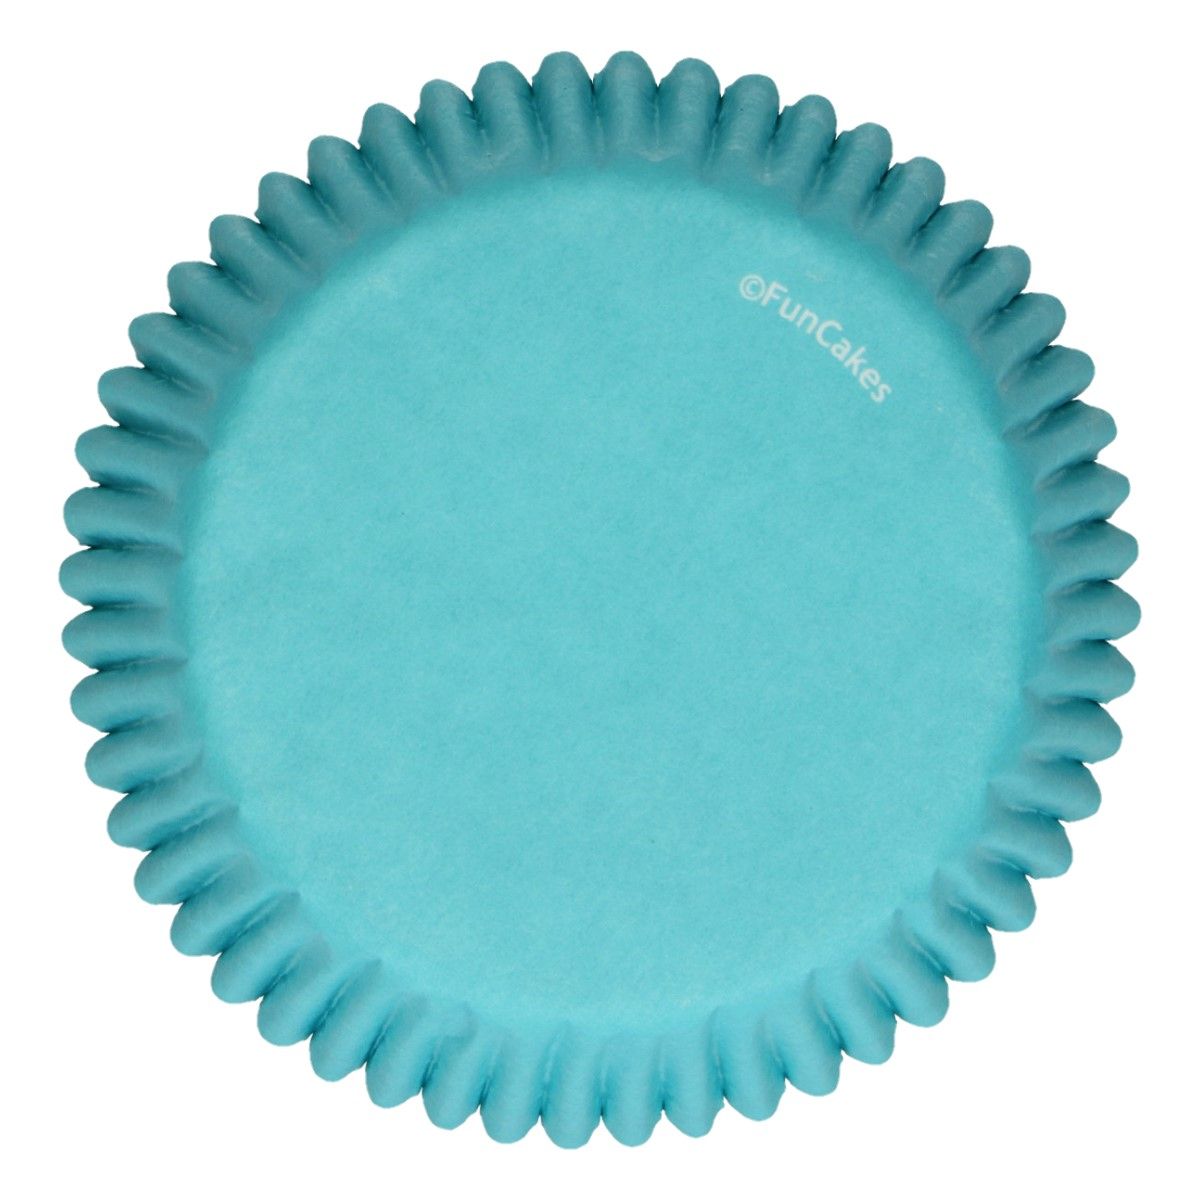 FC Baking Cups - Turquoise - pk/48